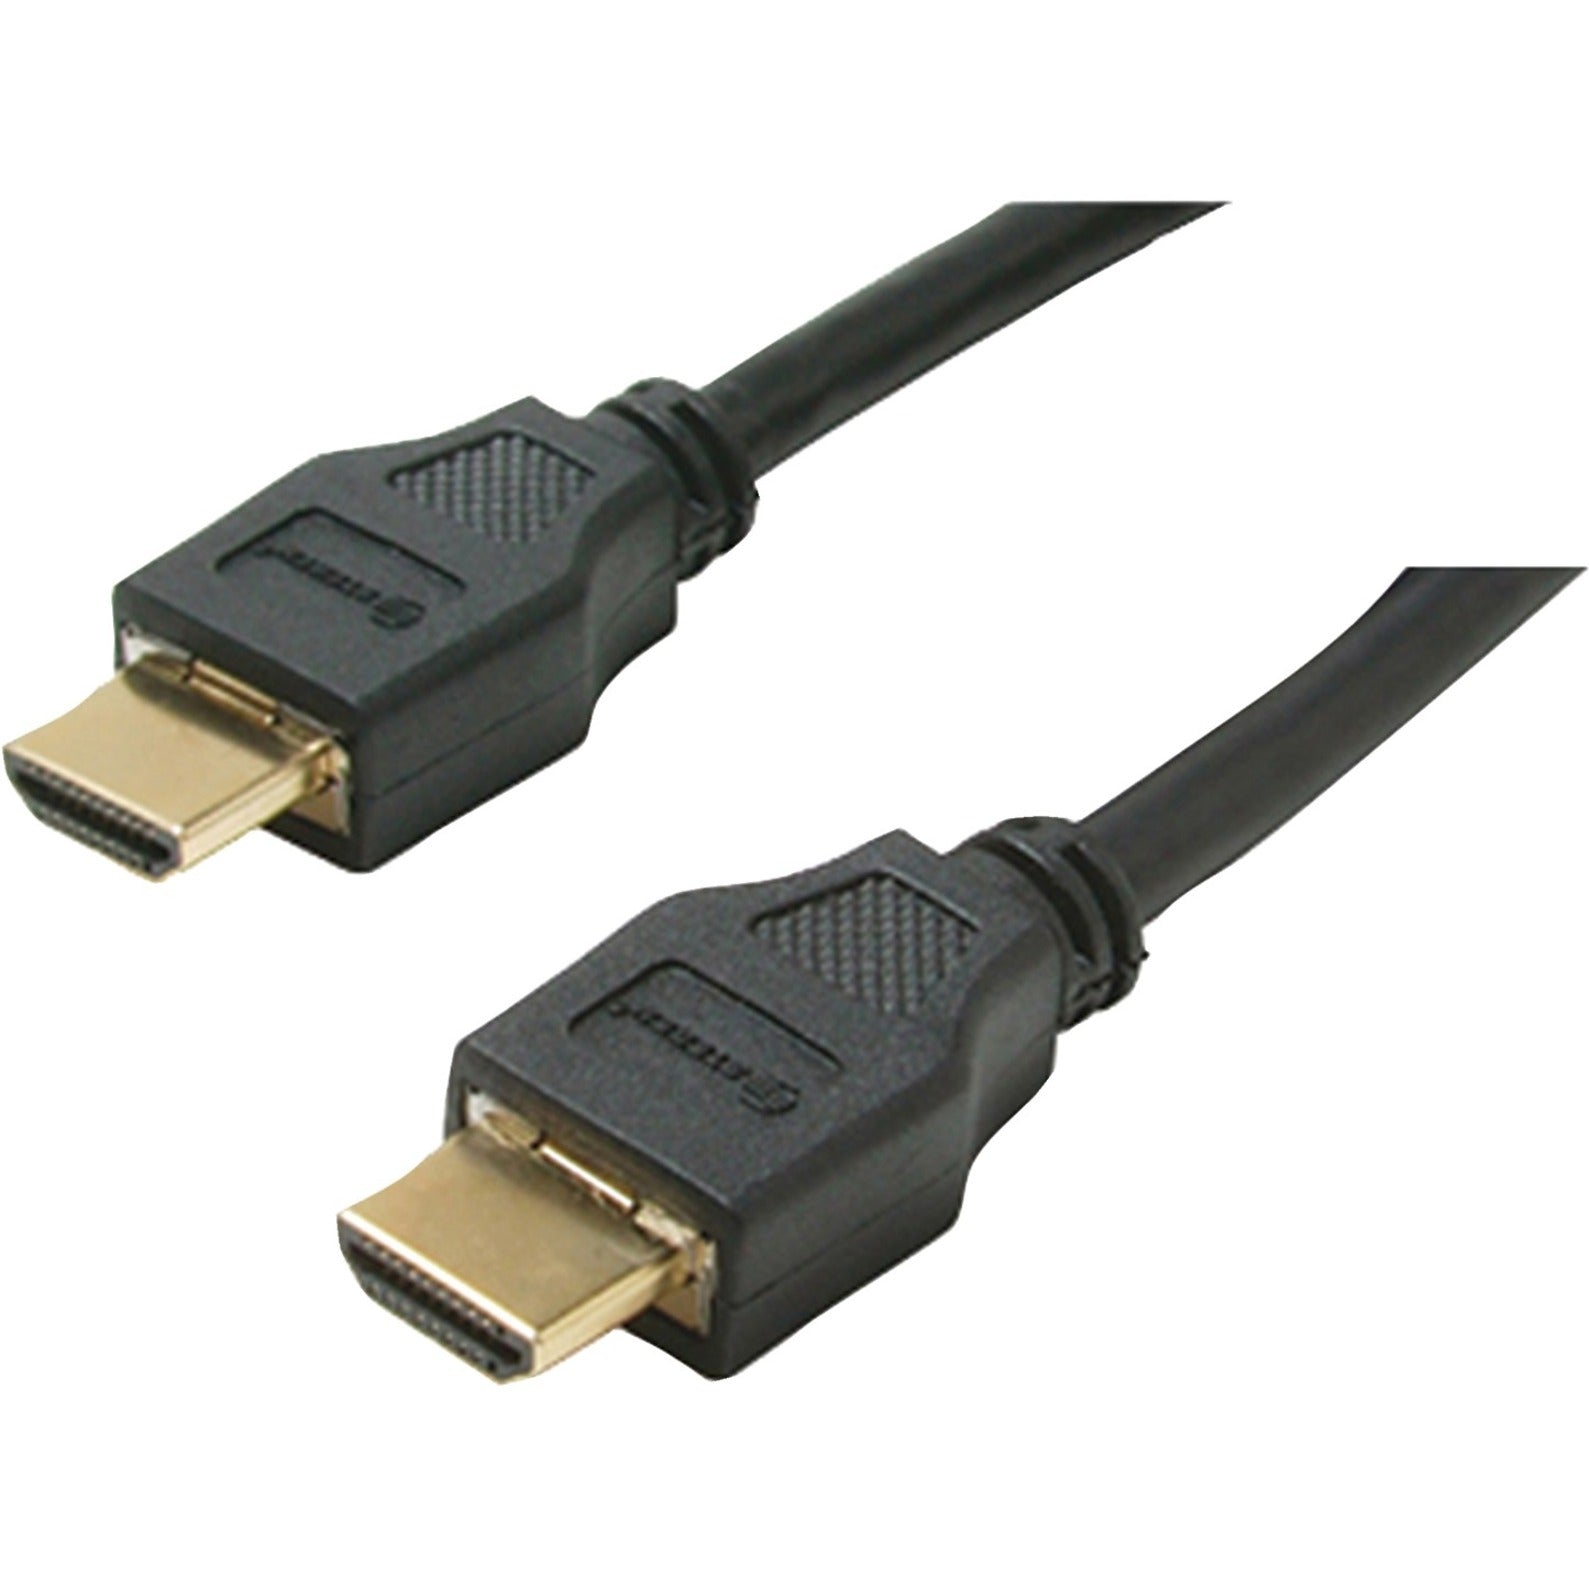 Steren 517-350BK HDMI with Ethernet Audio/Video Cable, 50 ft, Satin Black, UL/CUL Certified, RoHS Compliant